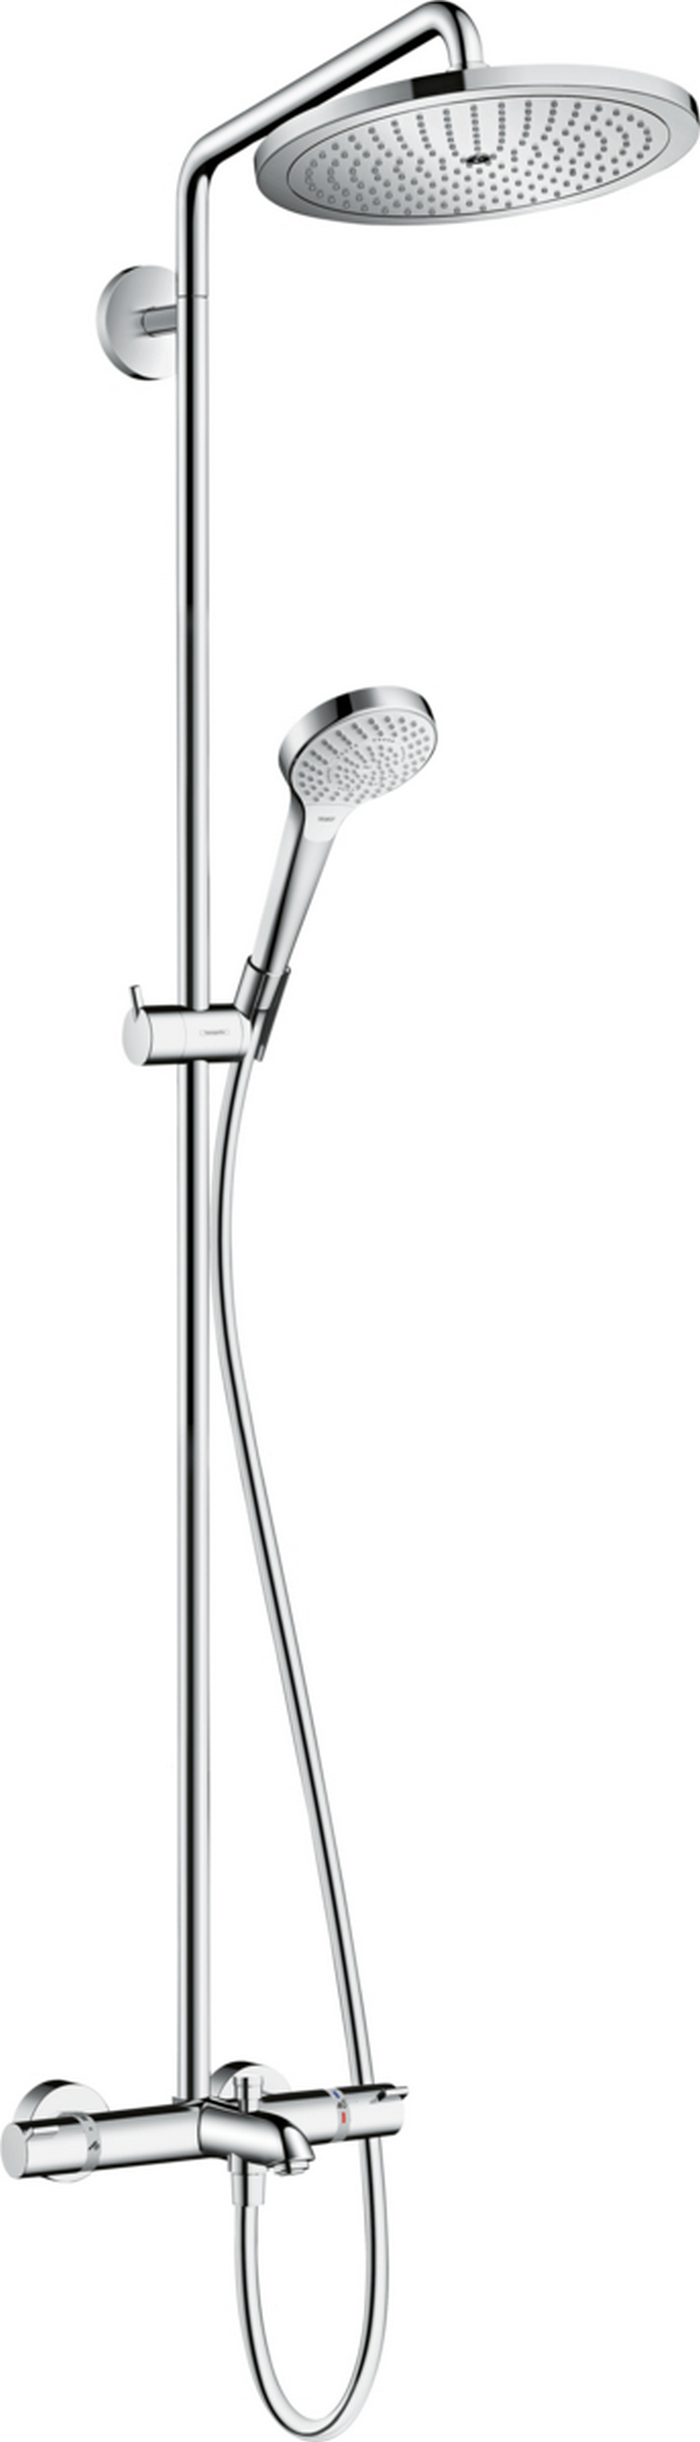 Hansgrohe Croma Select S Showerpipe 280 1jet 26792000